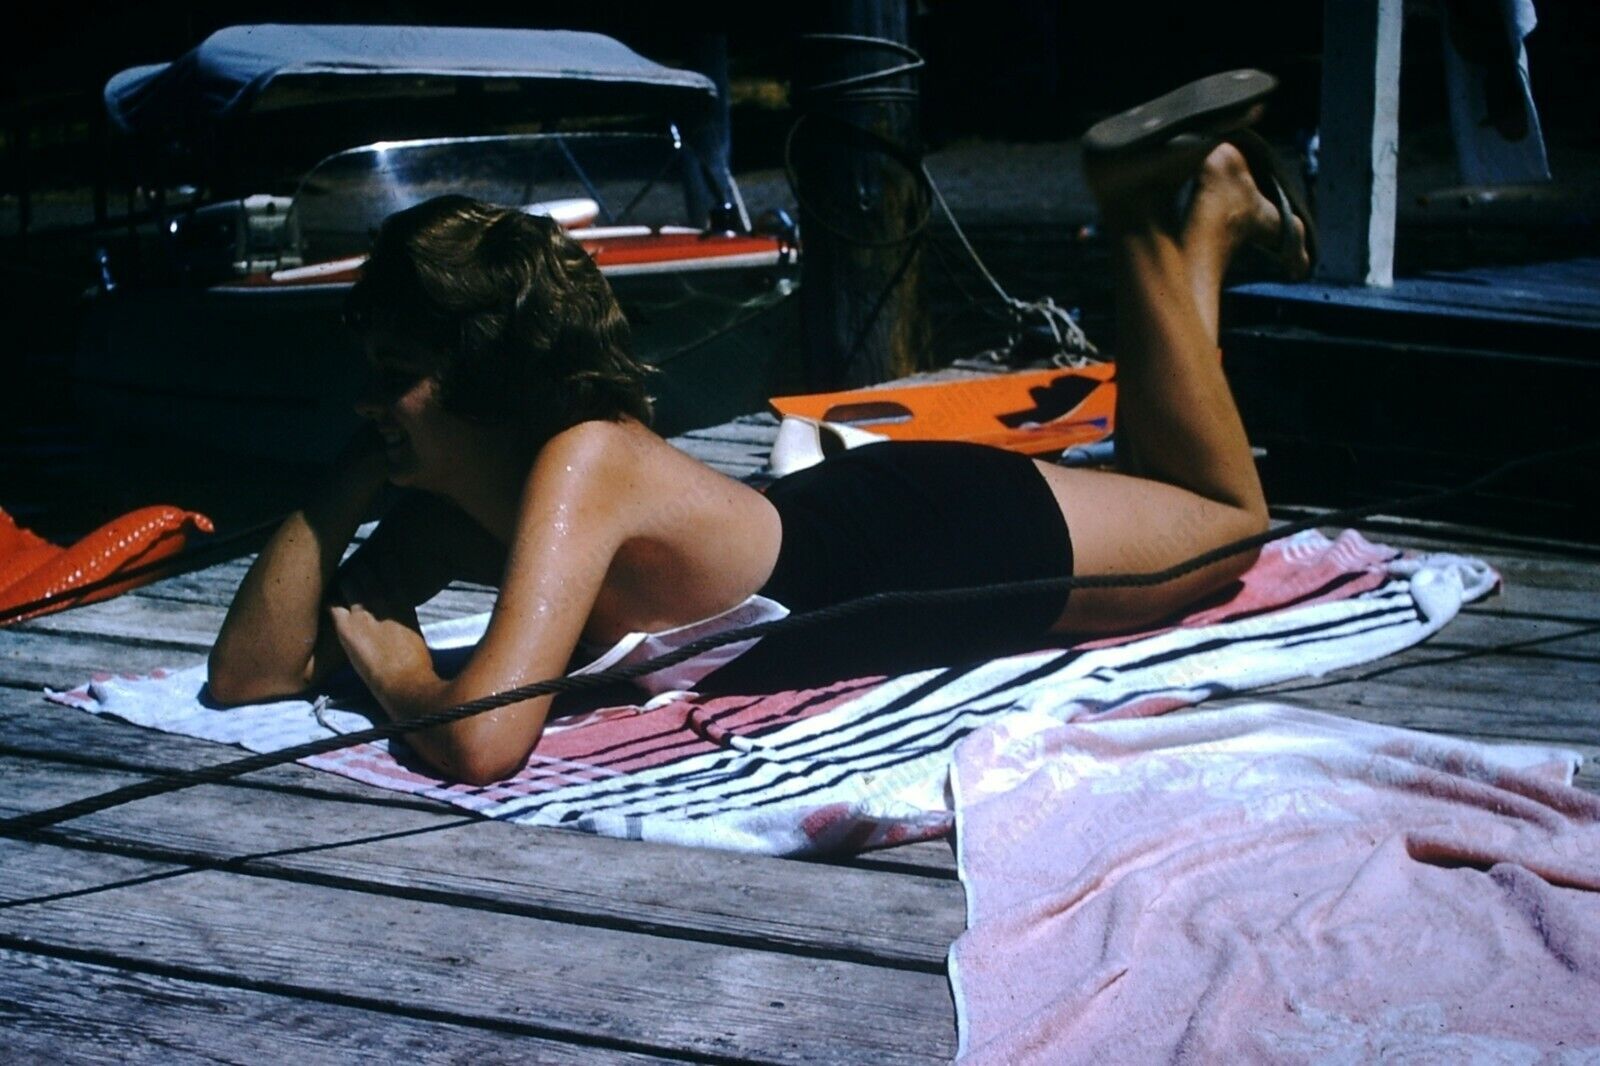 1950s candid of pretty woman in swimsuit Original 35mm SLIDE Hf1